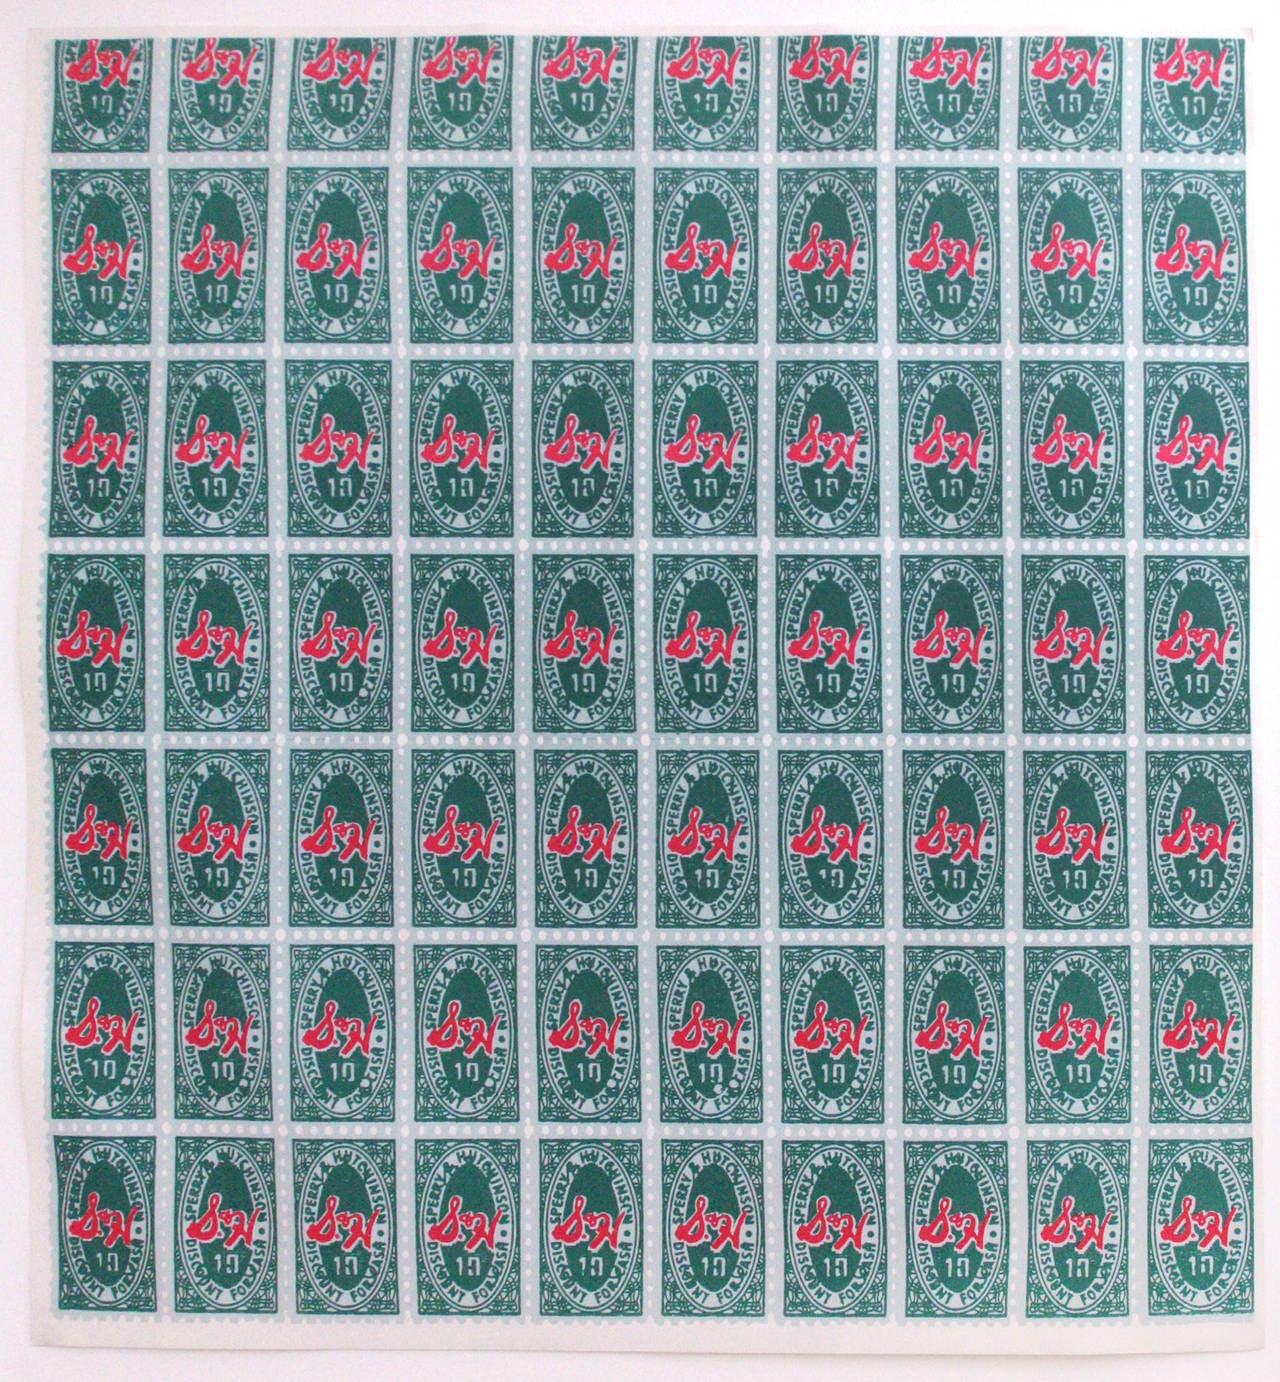 S & H Greenstamps - Print by Andy Warhol